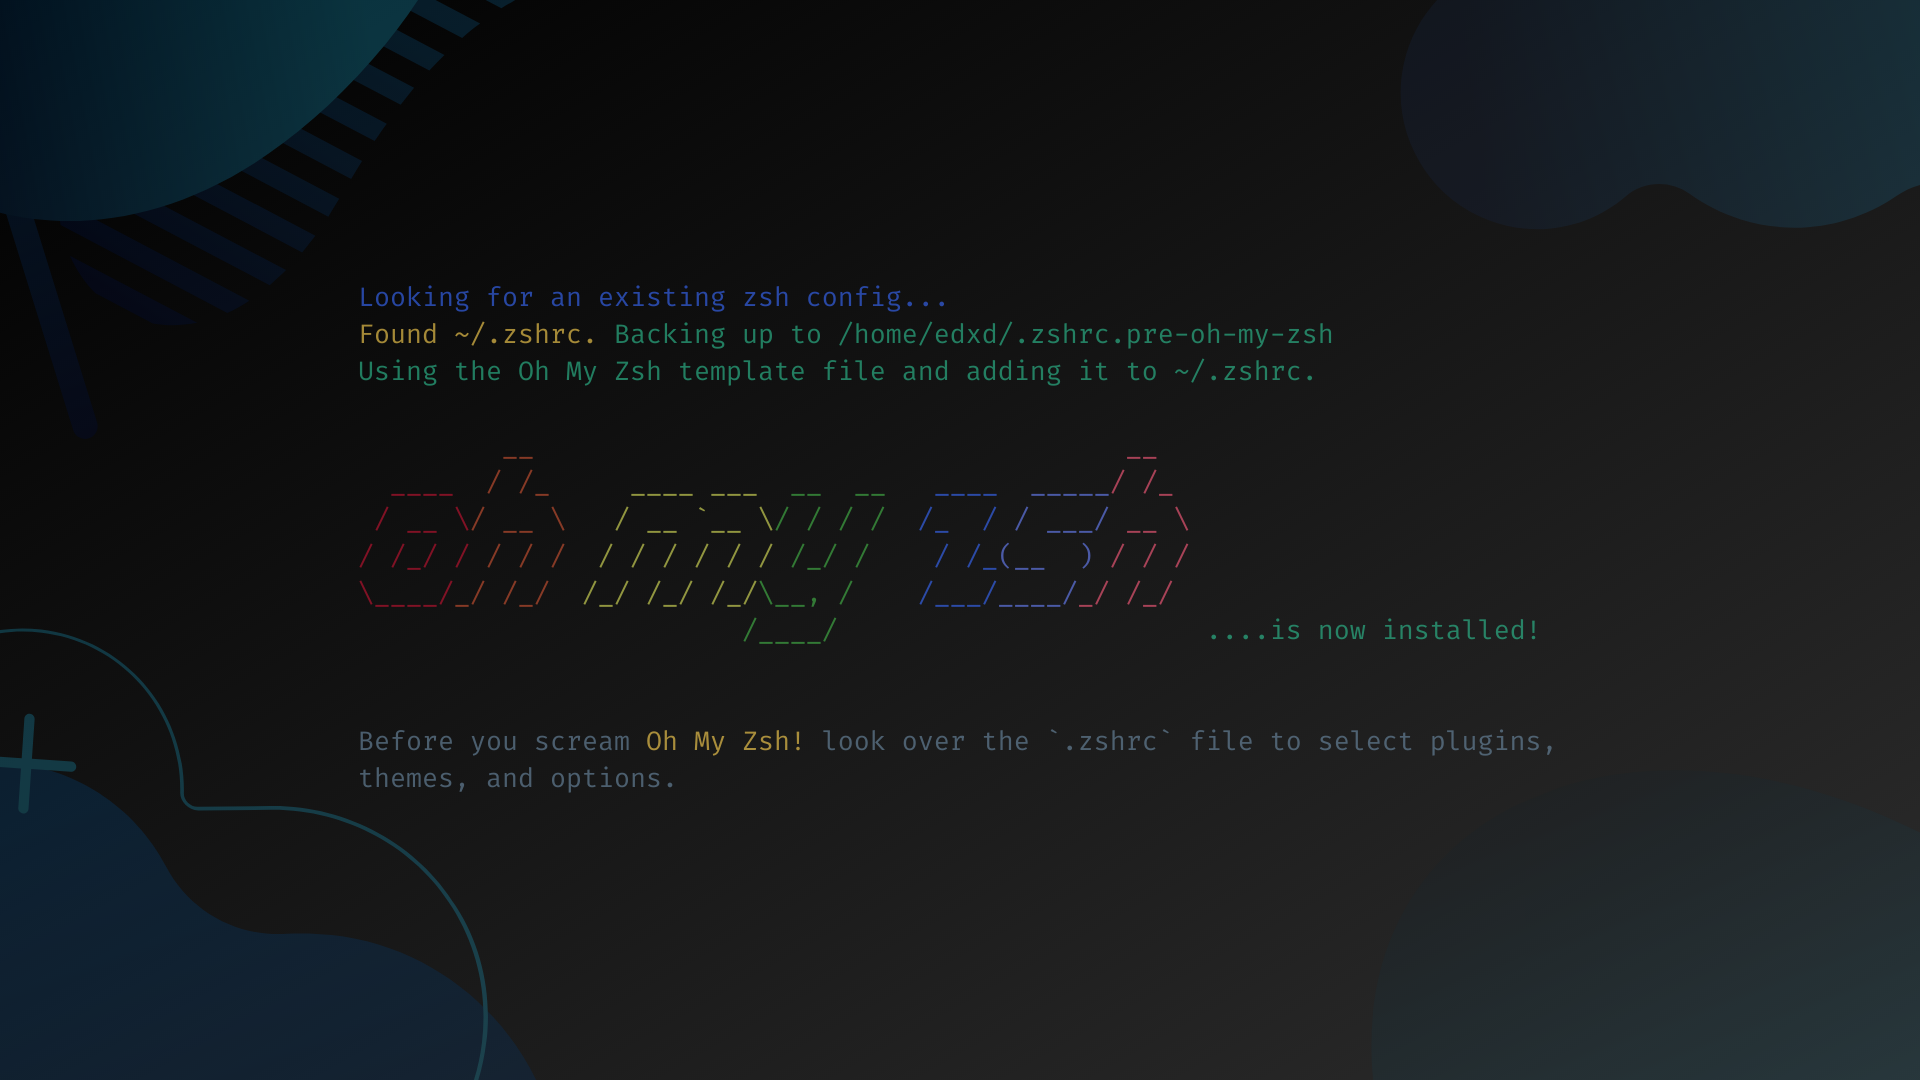 Install And Use Oh My Zsh Framework For Zsh On Linux